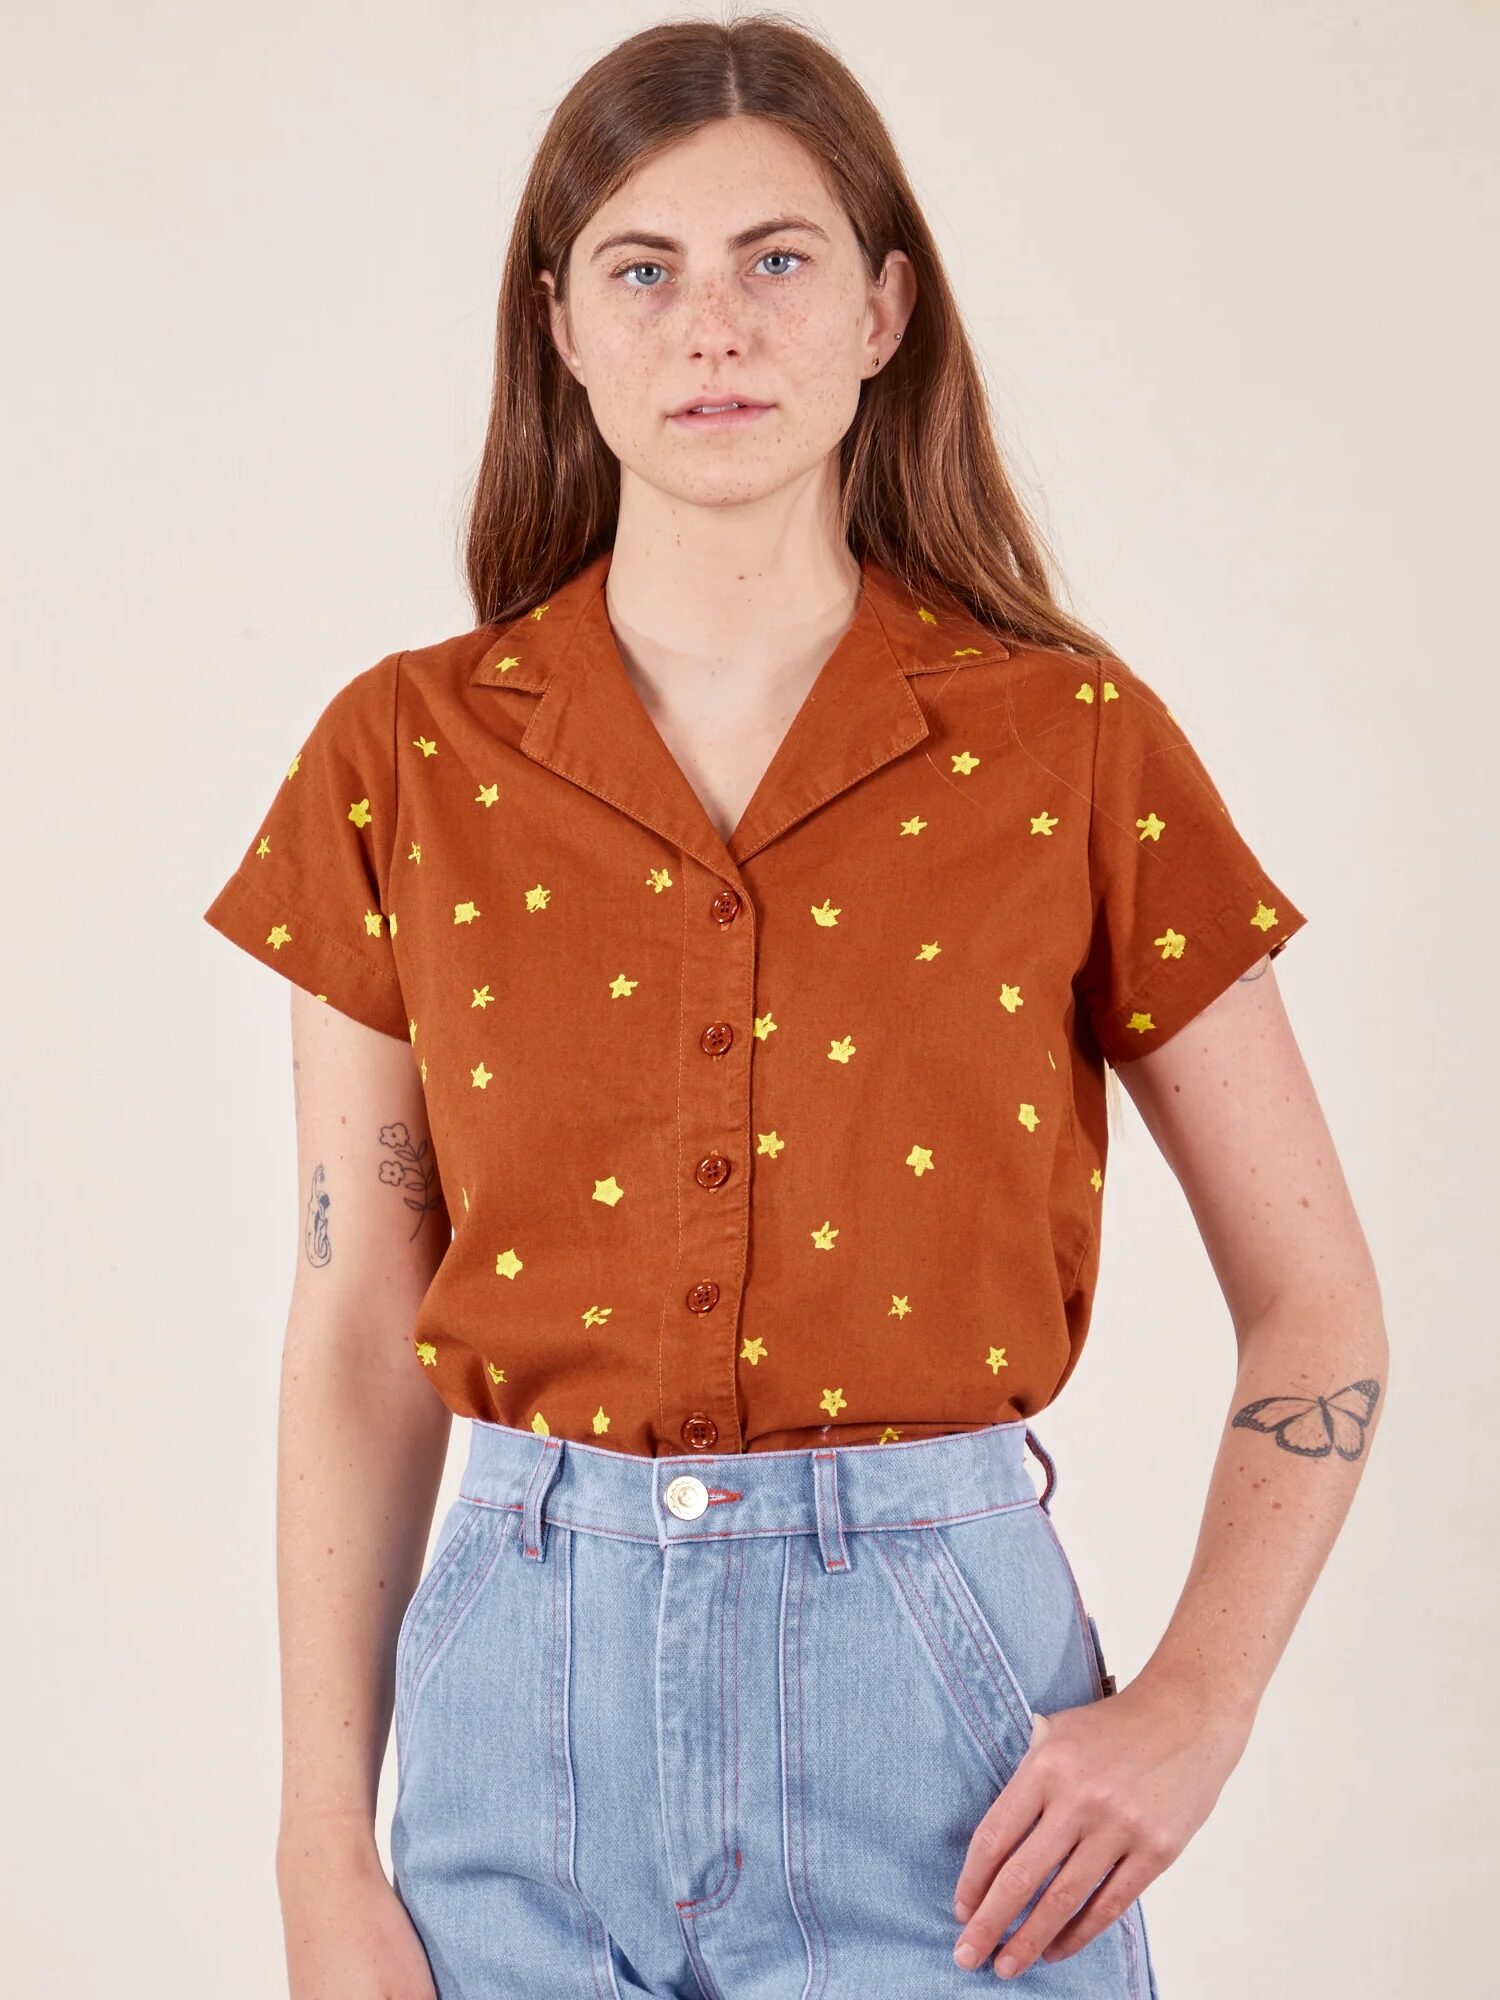 Woman posing in a rust-colored star-patterned shirt and light blue jeans.